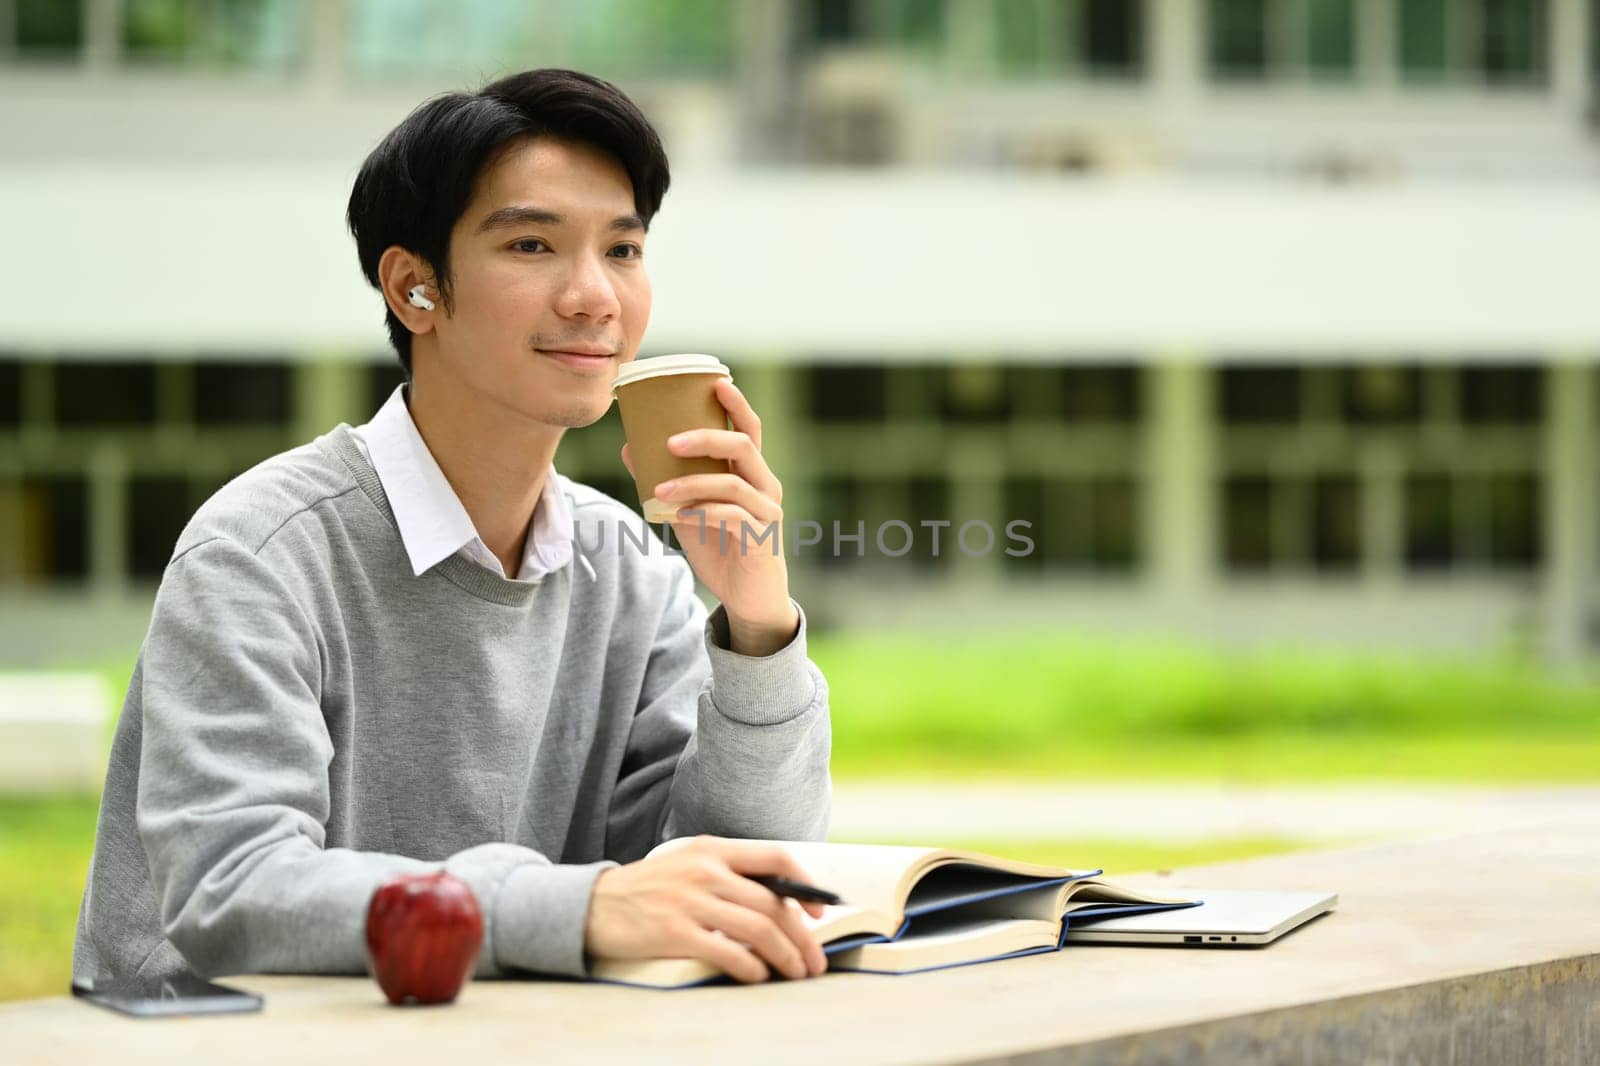 Relaxed man holding paper cup of coffee and looking away, sitting at table in front of university building.